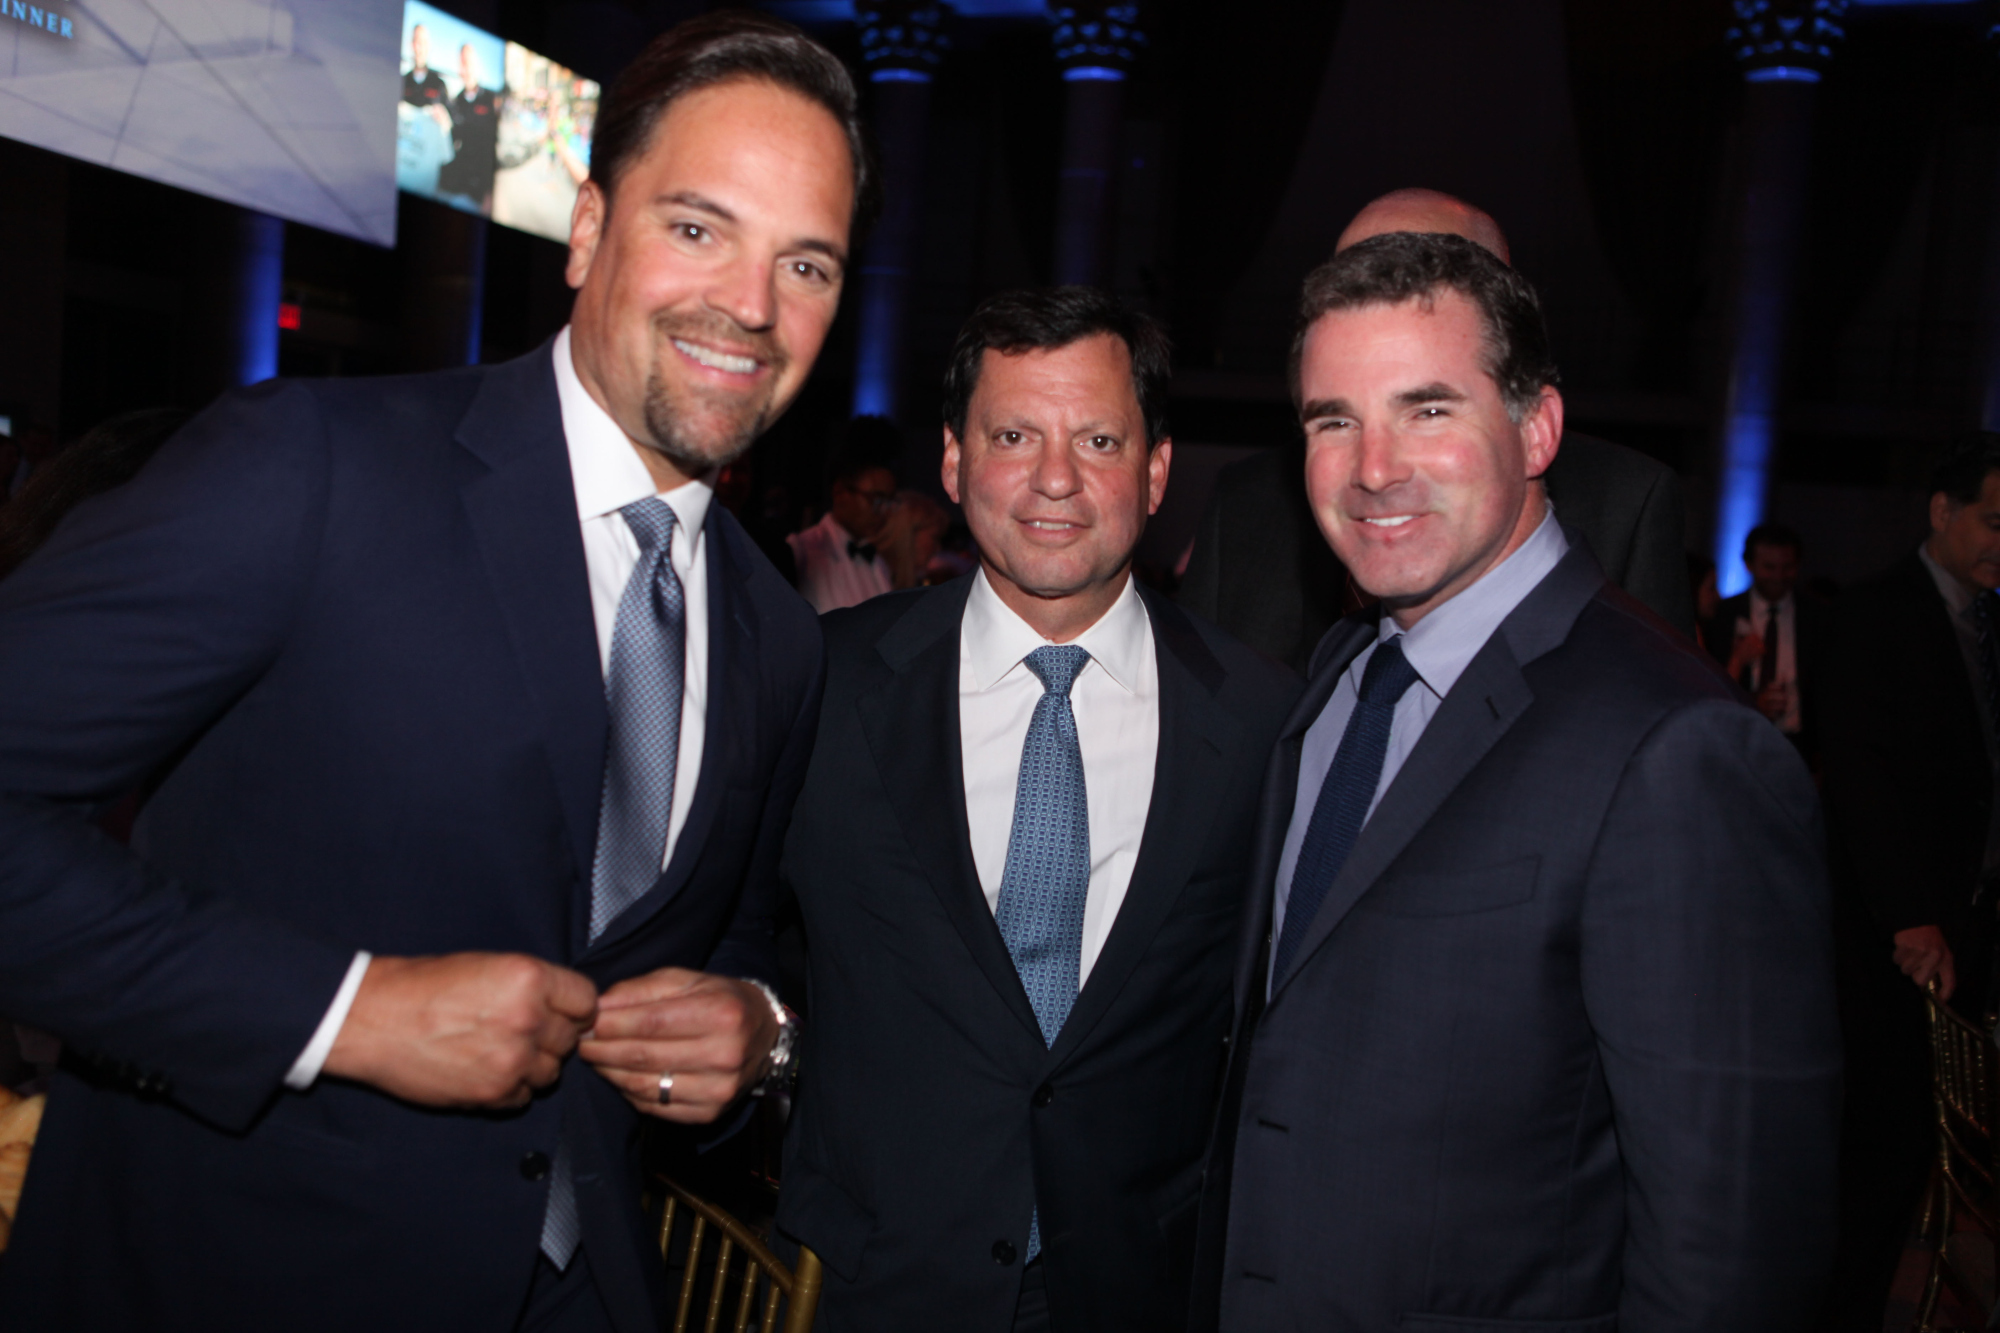 Mike Piazza suggests 9/11 national remembrance